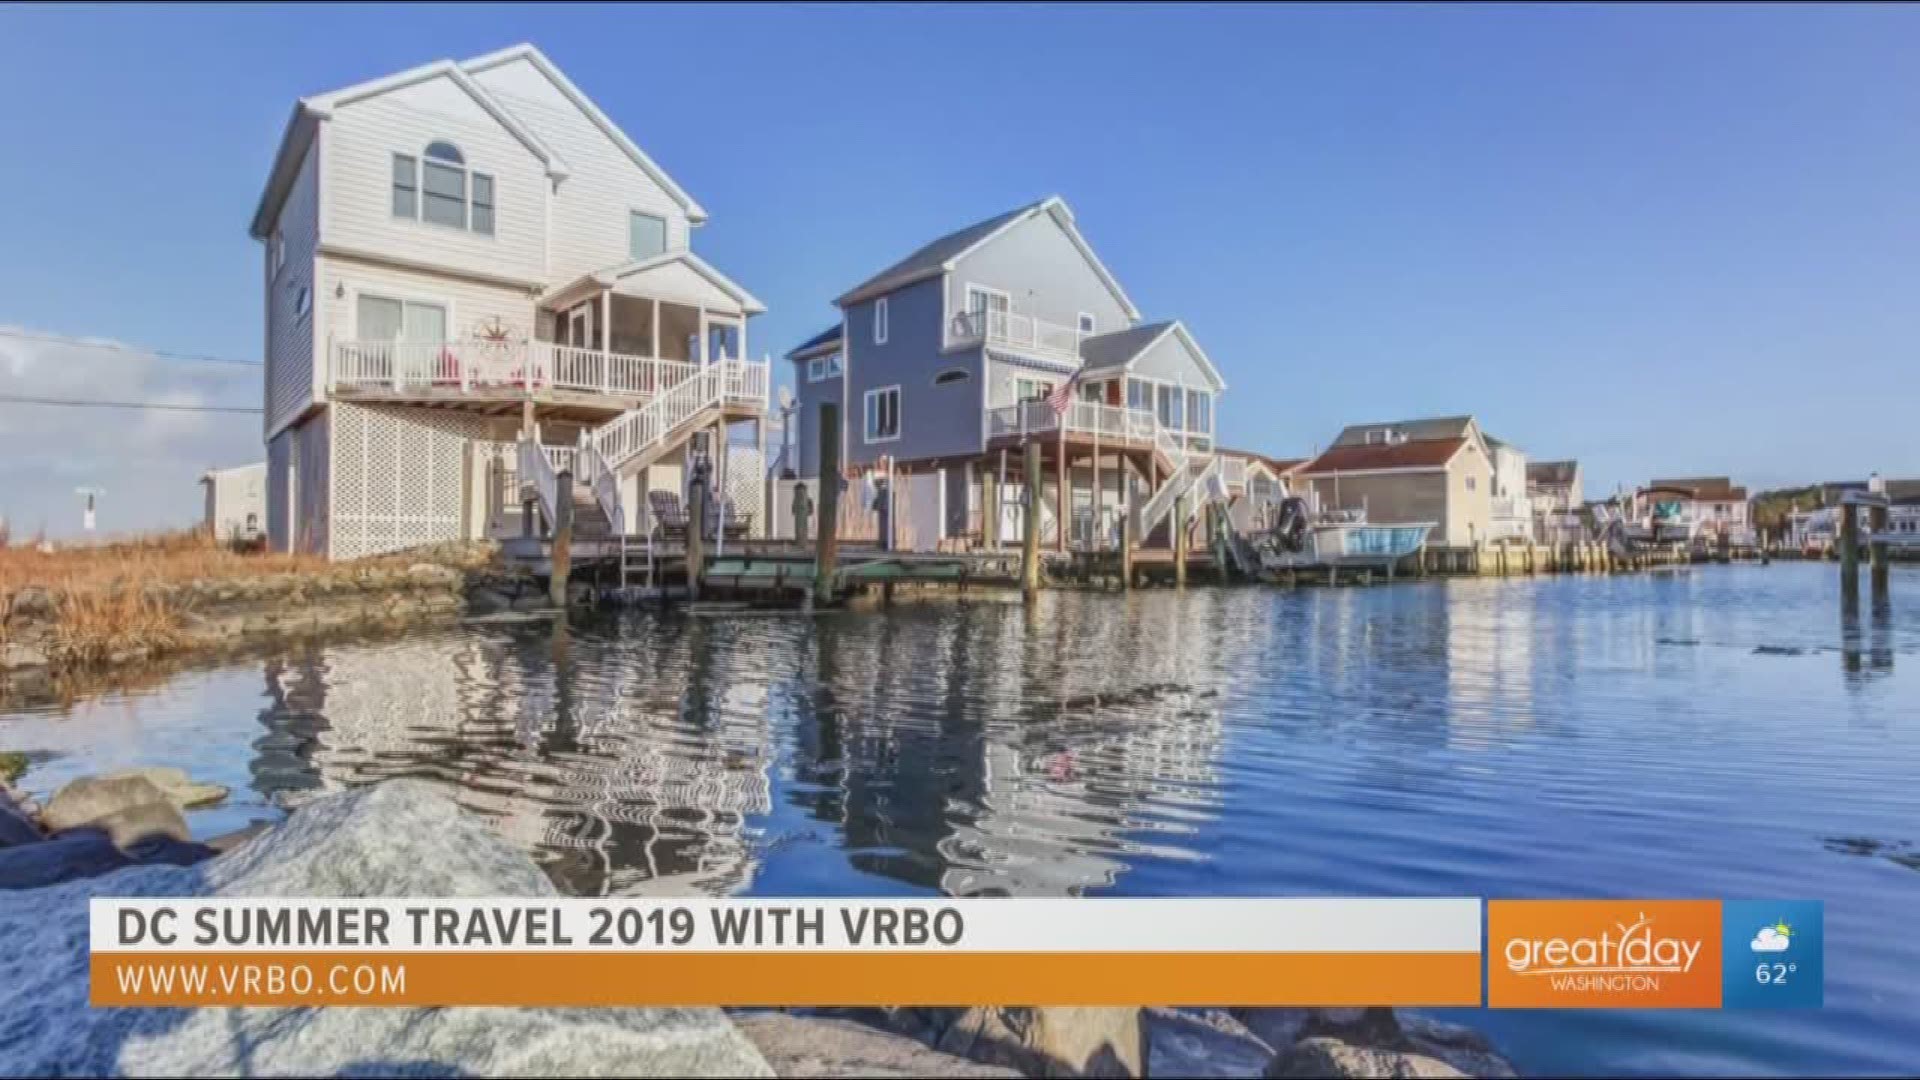 Melanie Fish from VRBO shares the hottest summer destinations that are close to the DMV. To plan your trip go to www.VRBO.com